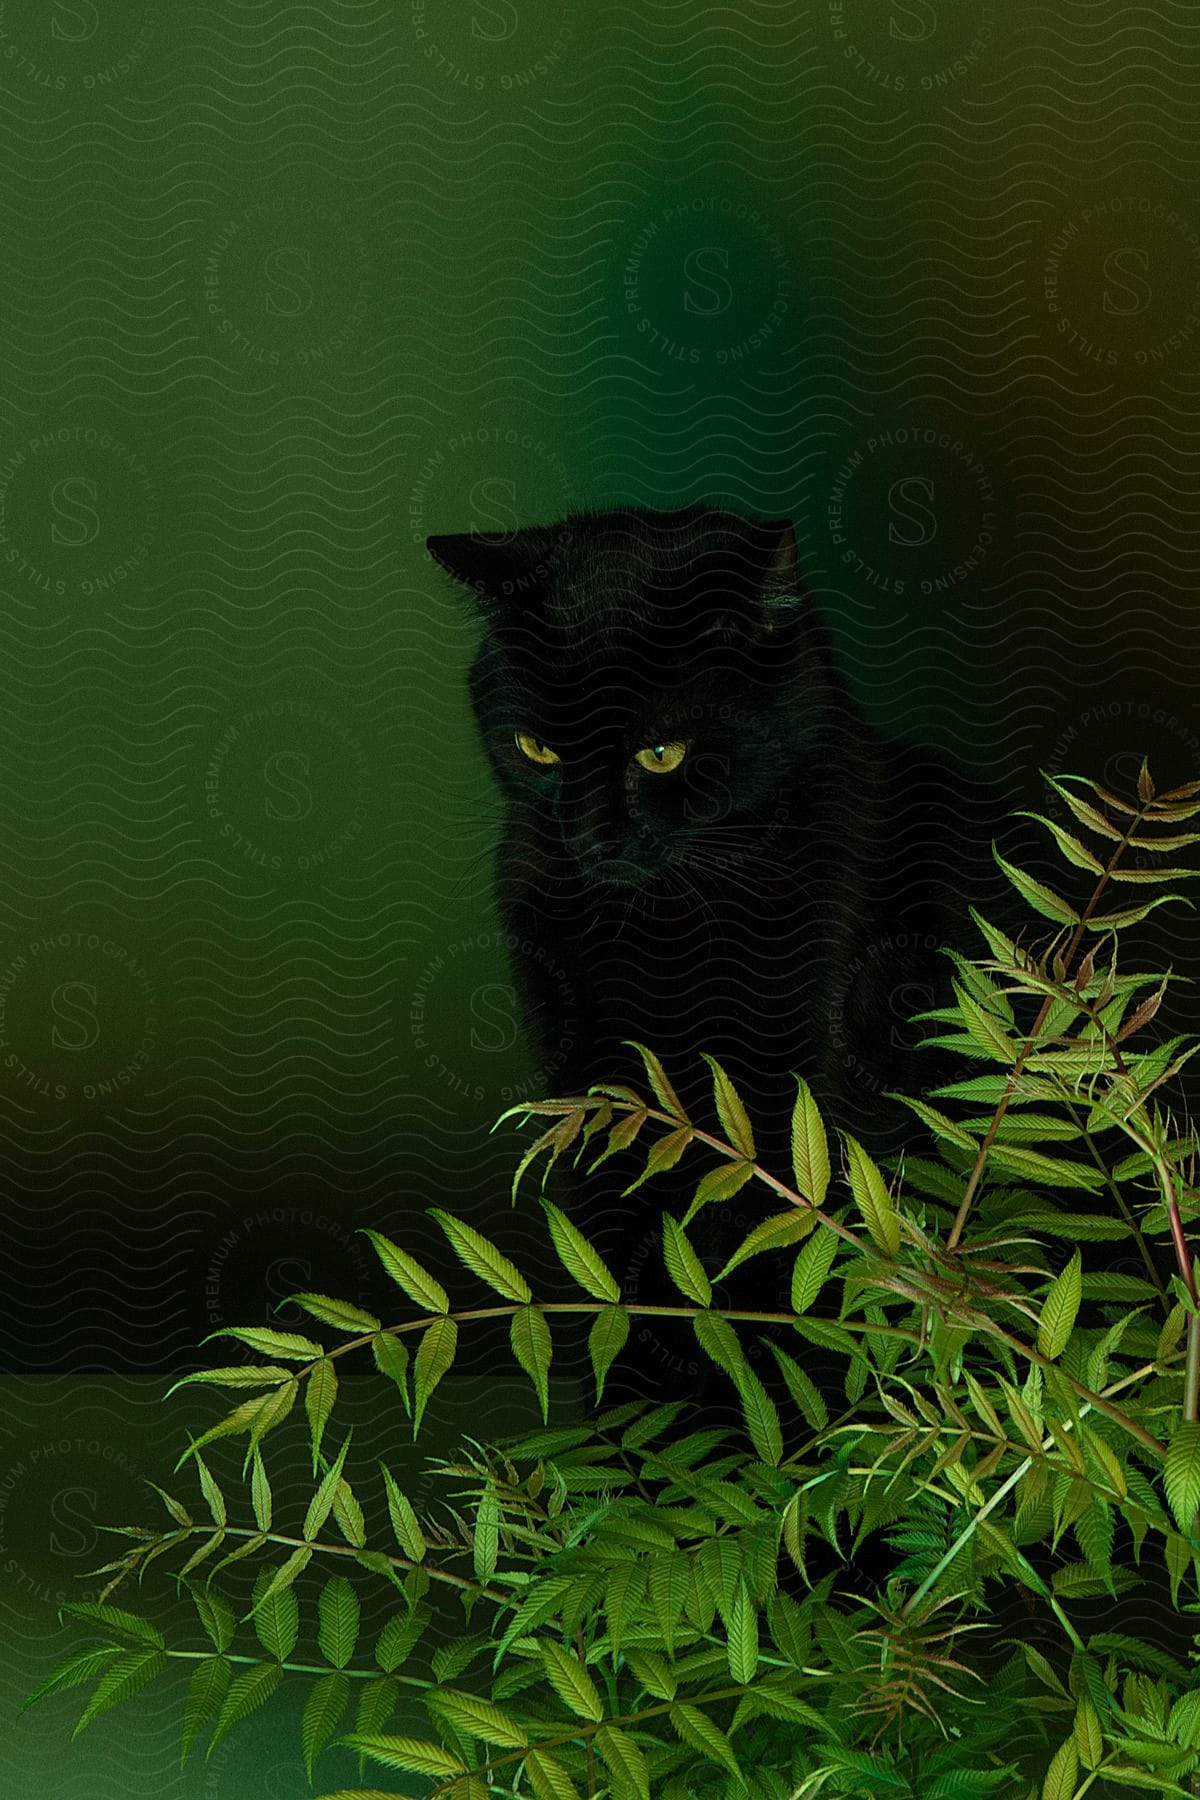 A black cat with yellow eyes looking at a green plant in a black and green environment